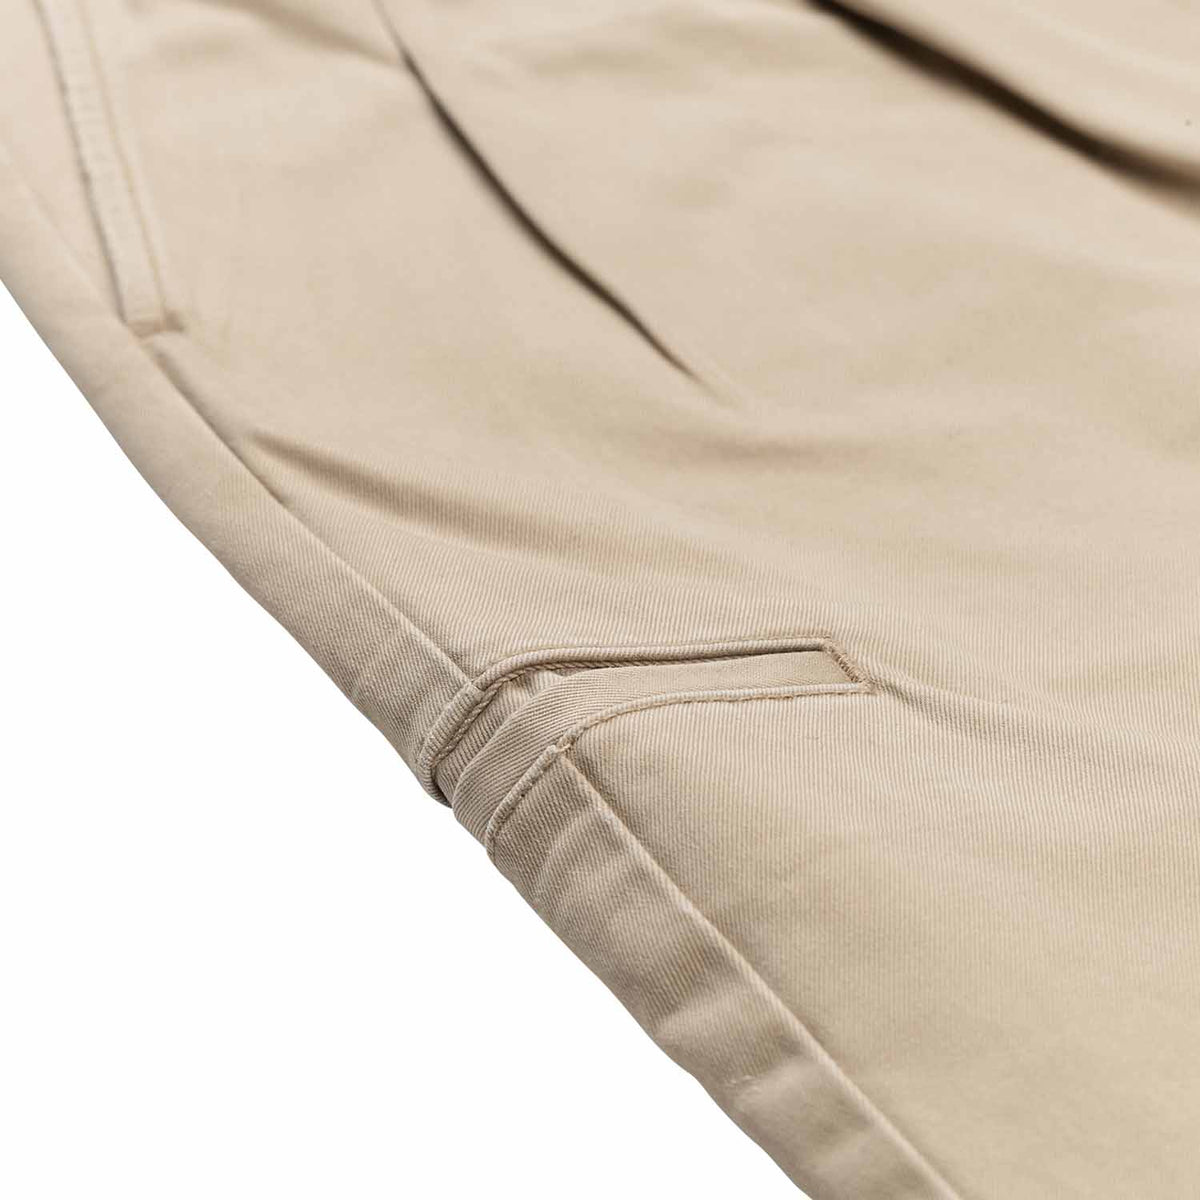 Polo Ralph Lauren x Element Whitman Chino in tan. Close up of small pocket on right middle leg.